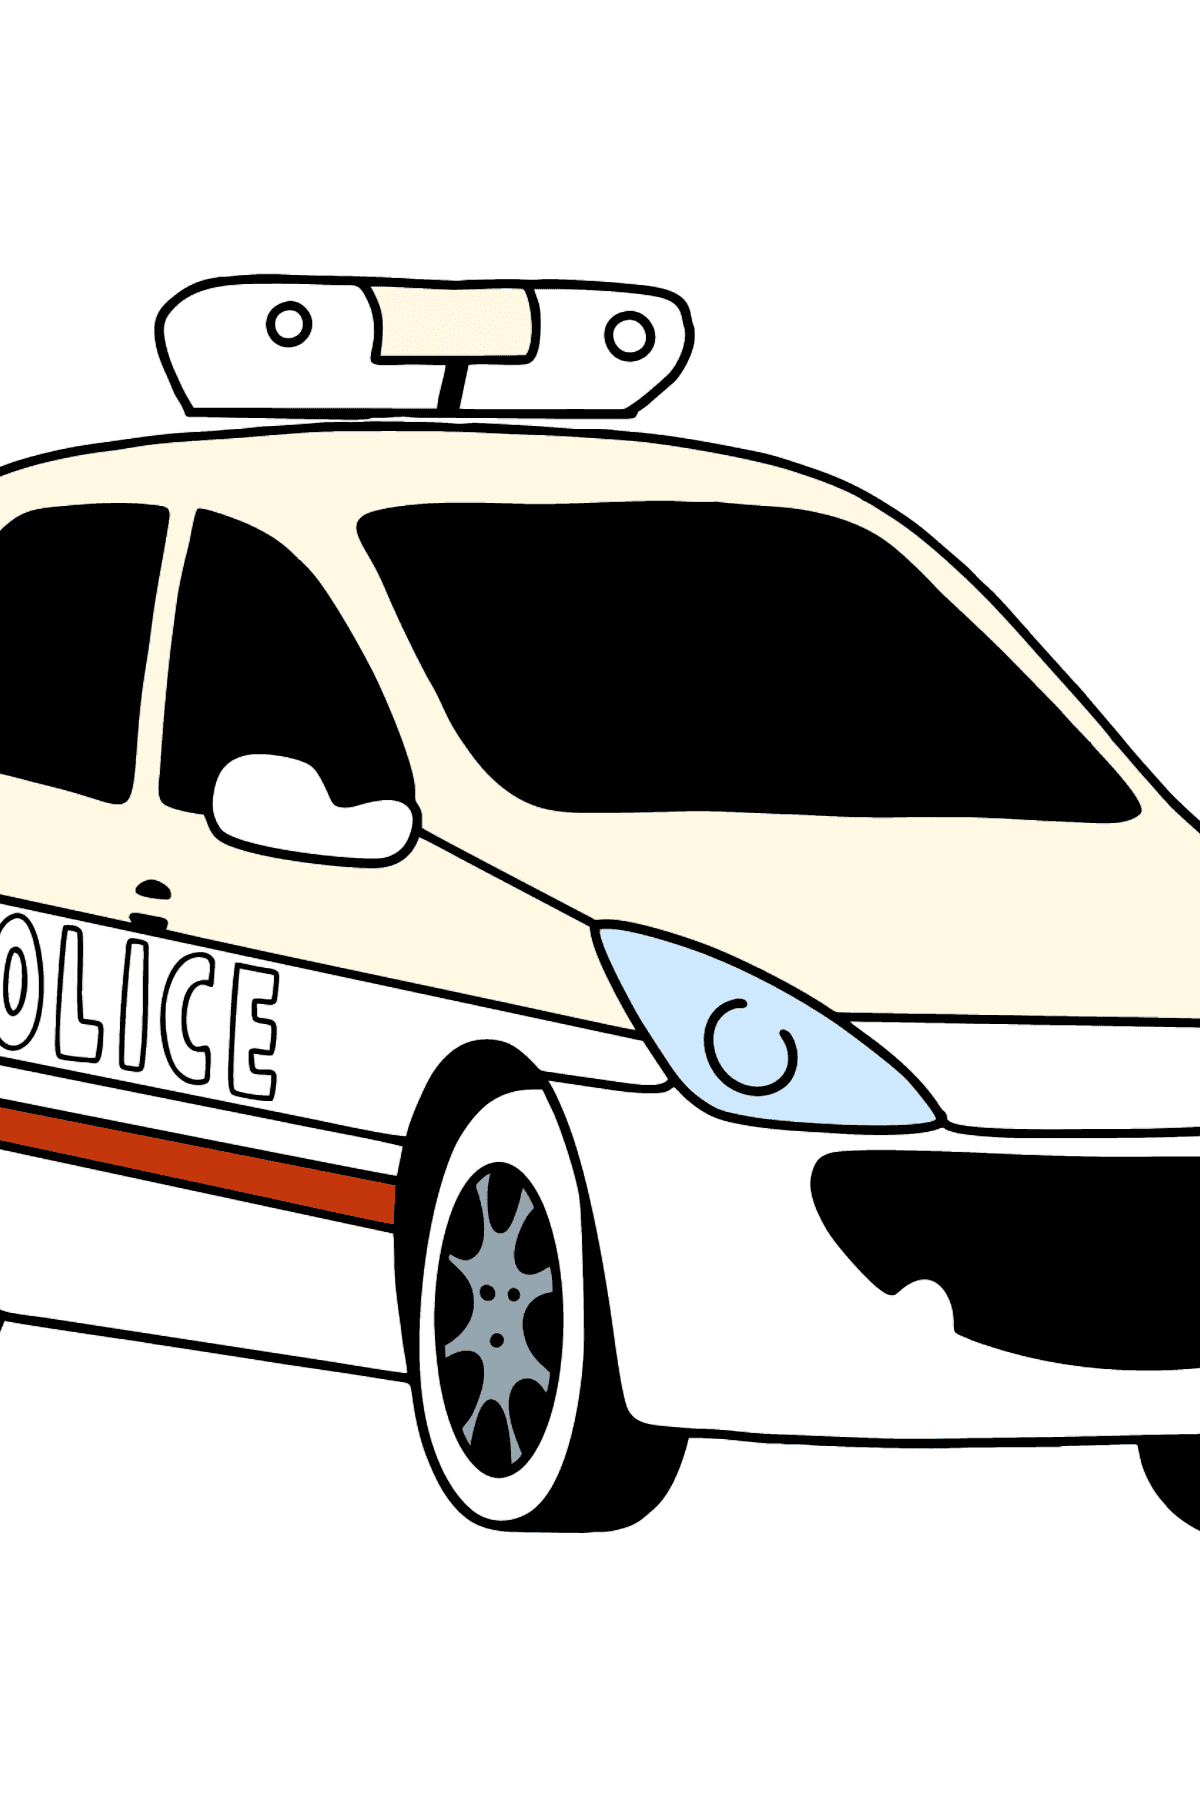 Police Car in France coloring page - Coloring Pages for Kids